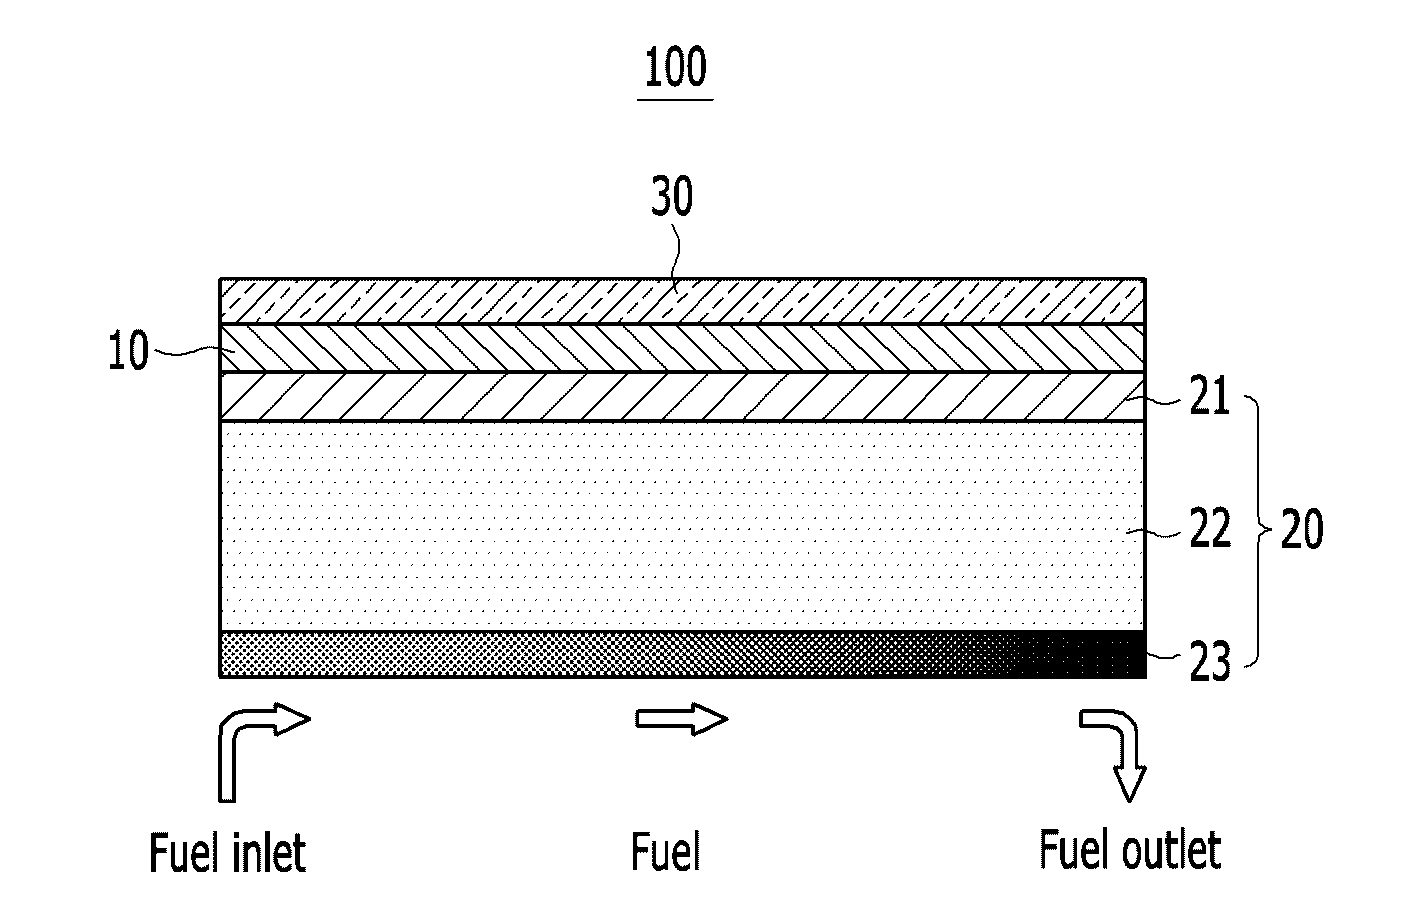 Method of fabricating a solid oxide fuel cell